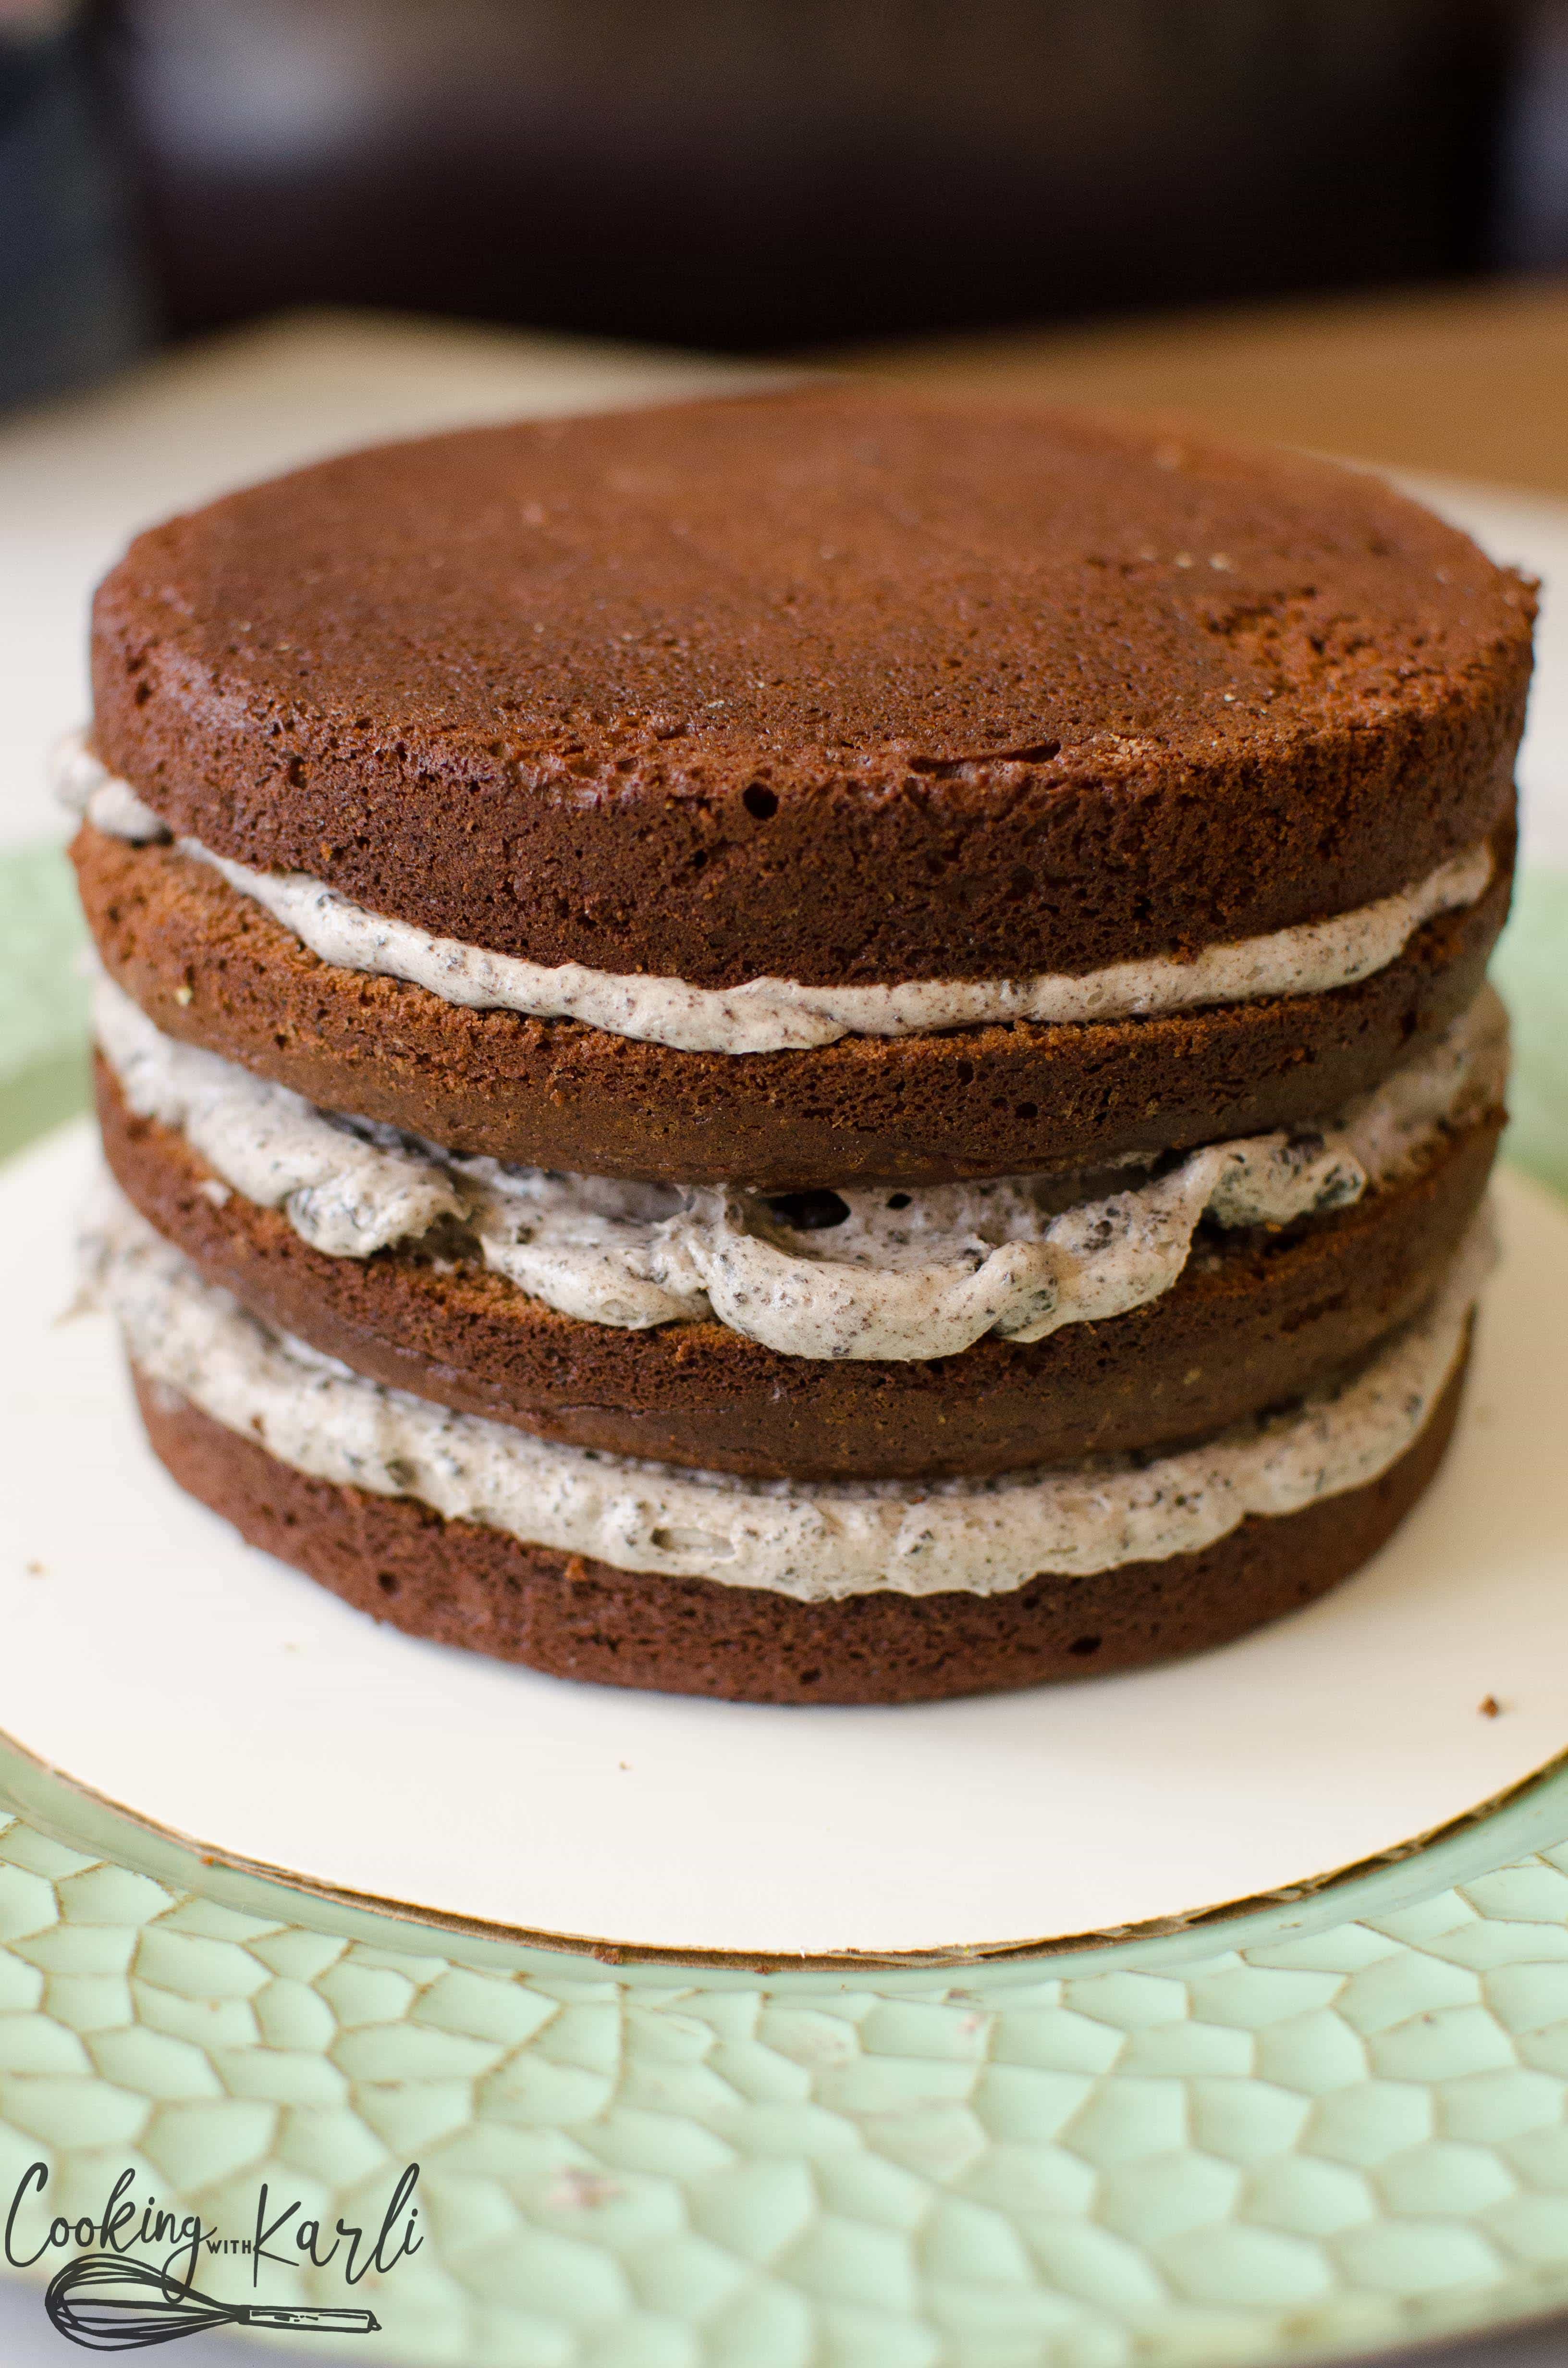 Oreo frosting is perfect to go onto chocolate layered cake.